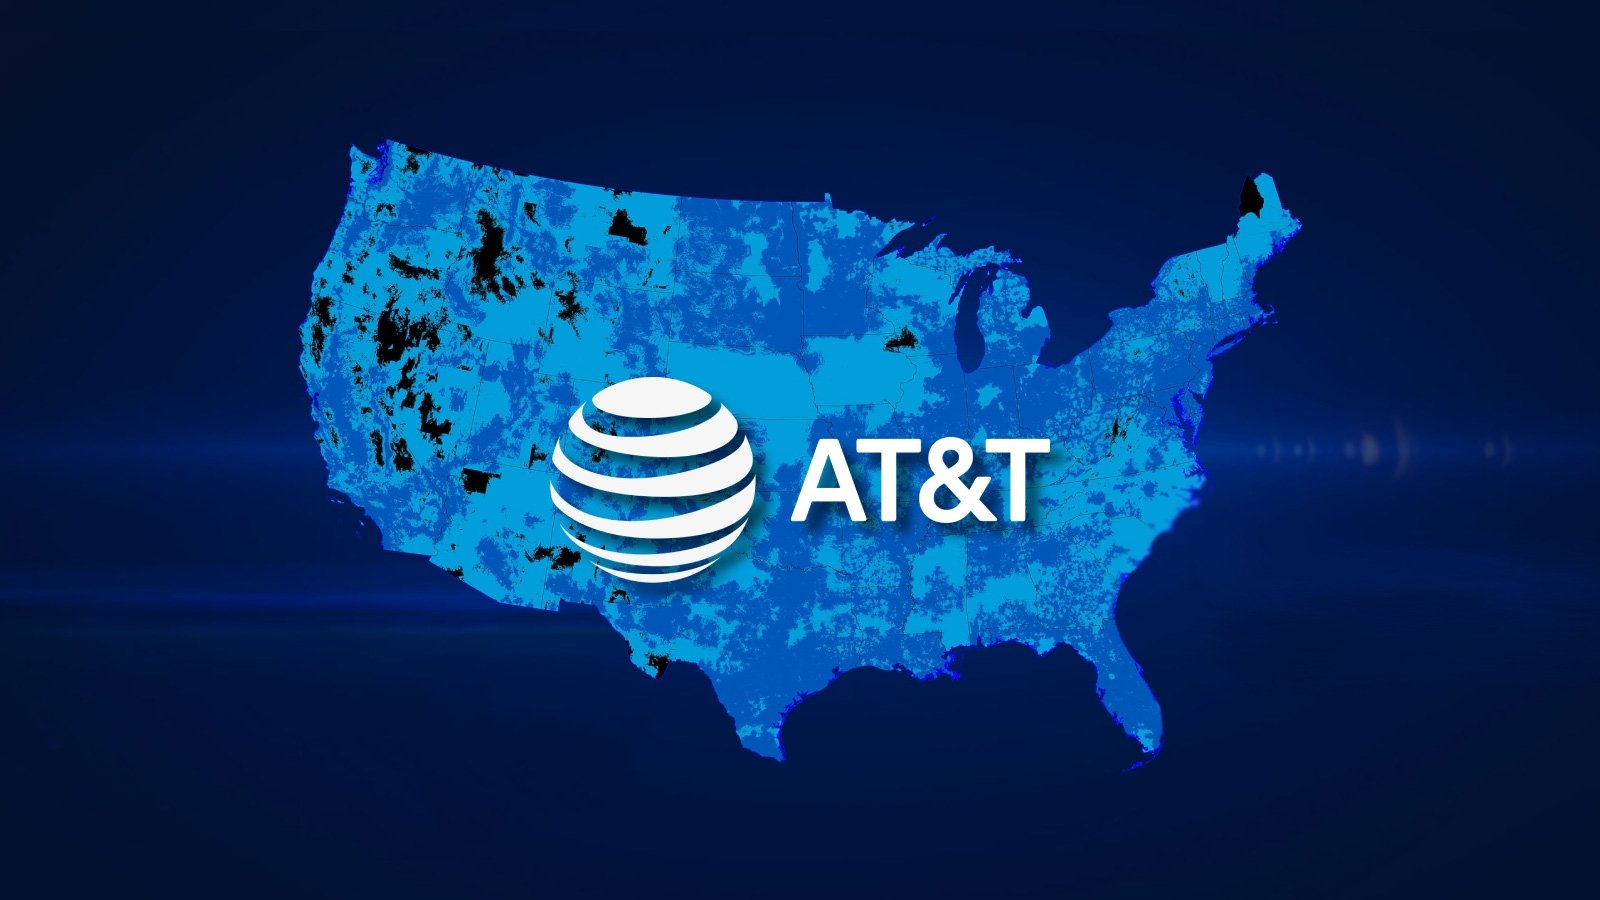 AT&T now says data breach impacted 51 million customers